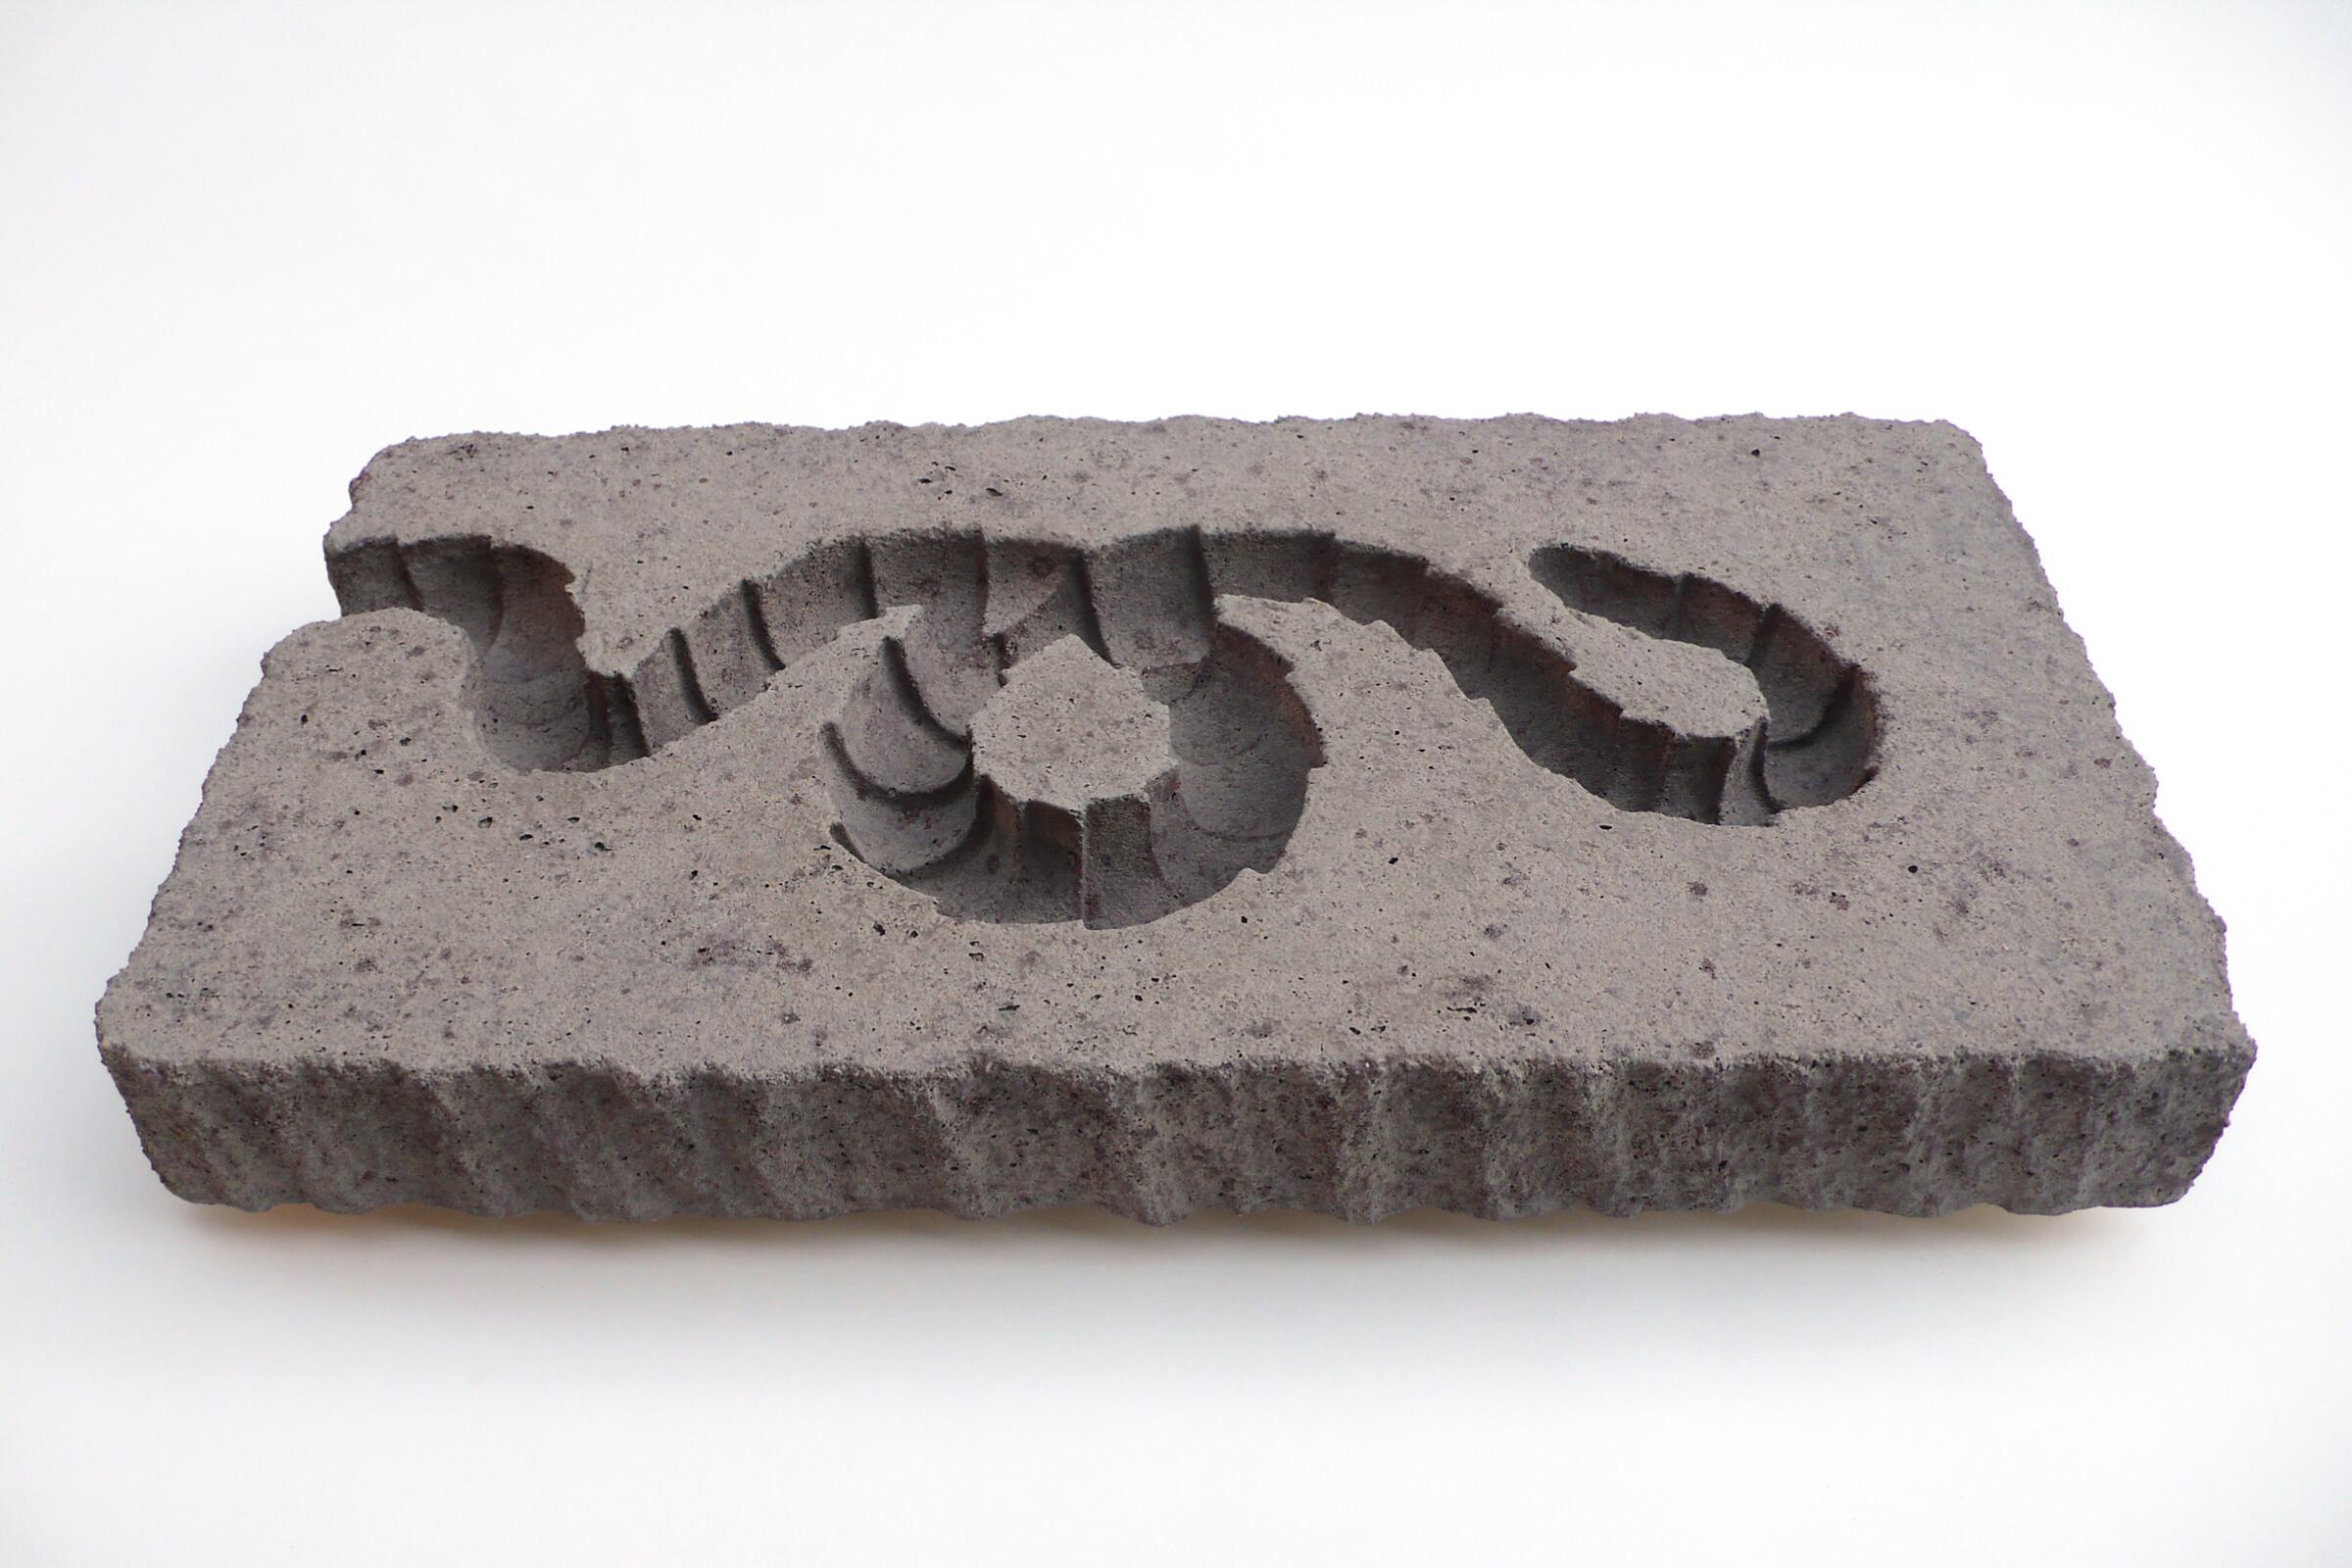 A gray rectangle of a stone-like material, with a snake carved deeply into its surface